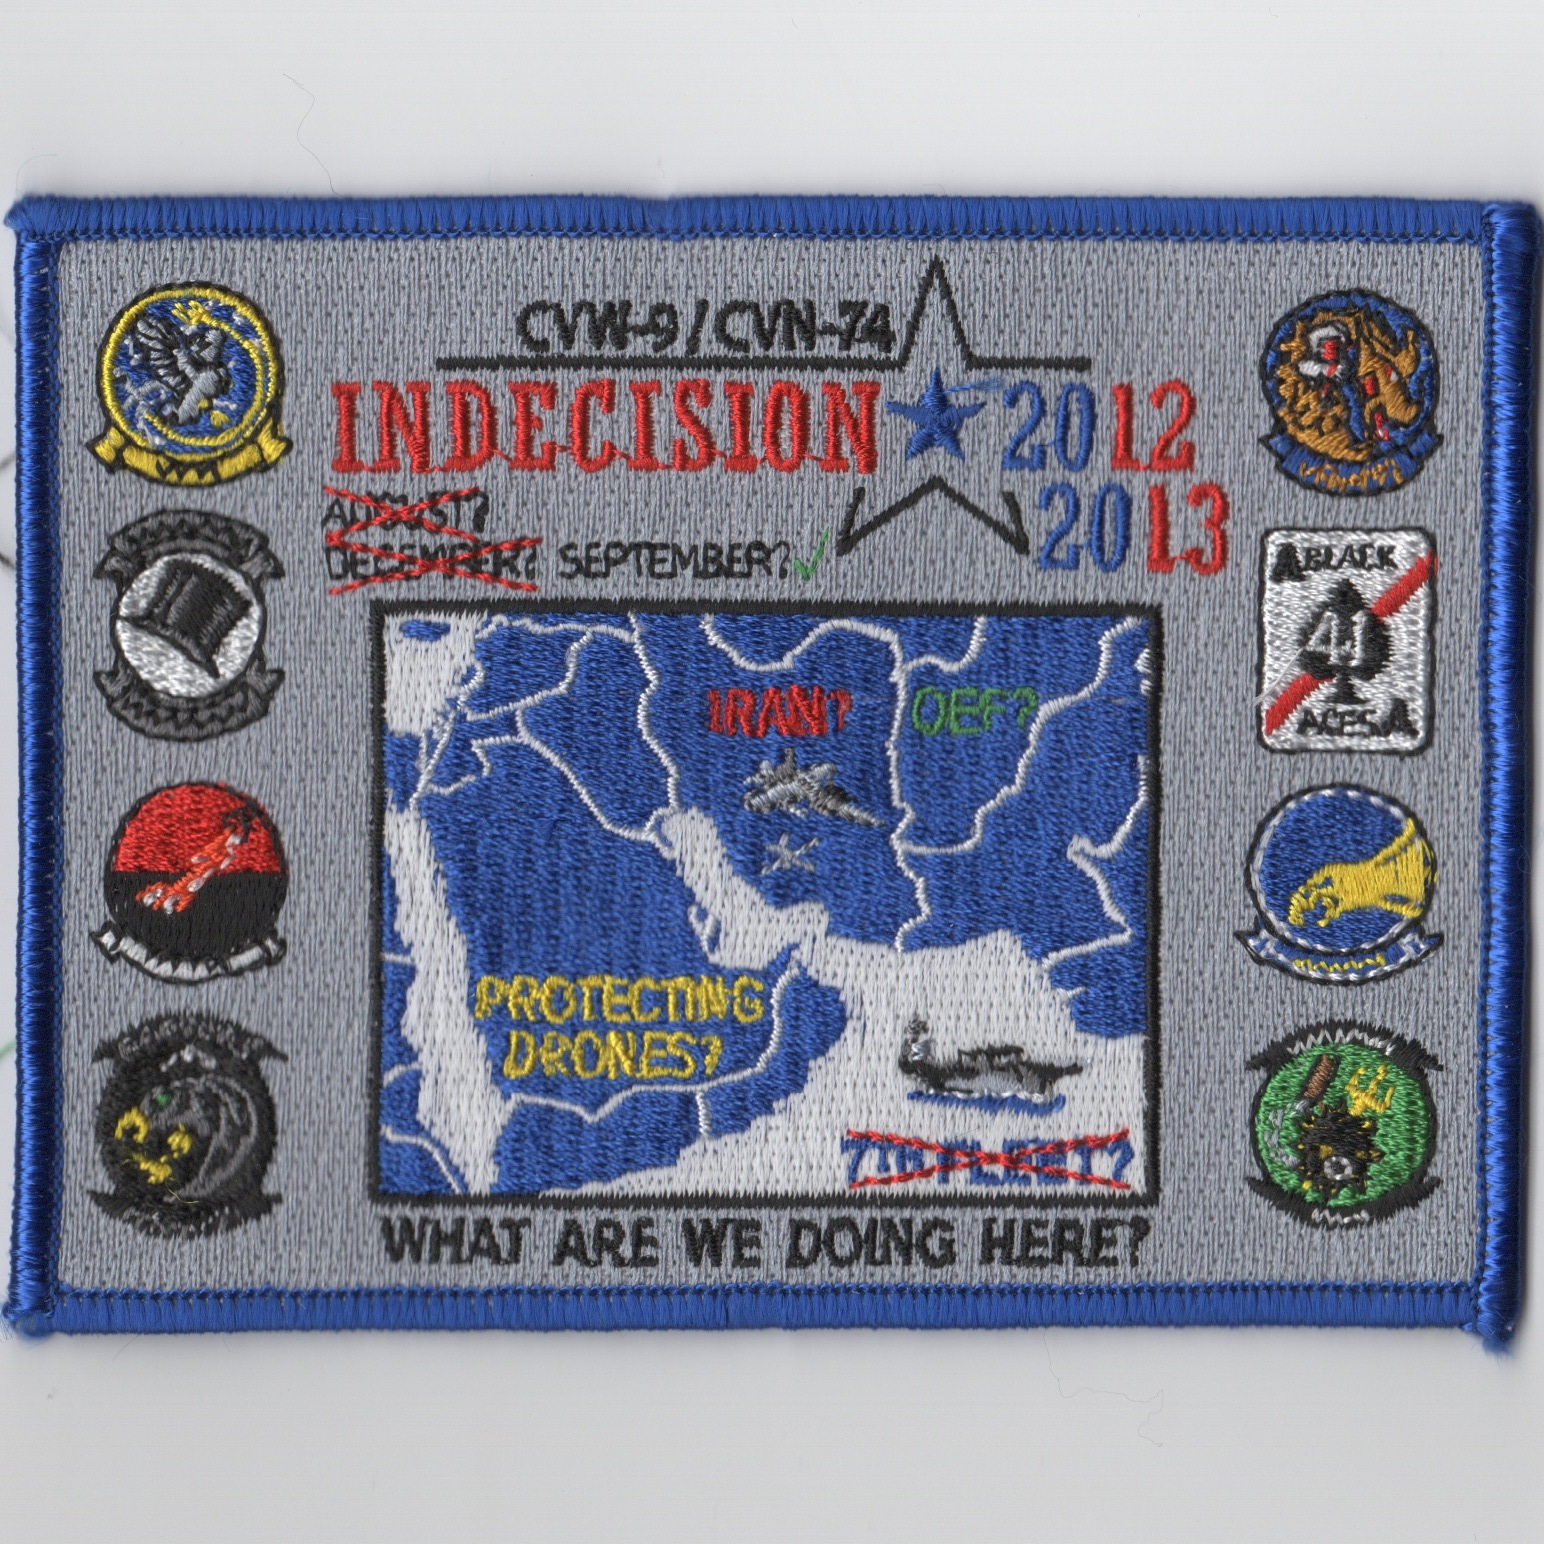 CCSG-3 MAGICAL MYSTERY TOUR 2012-2013 DEPLOYMENT  PATCH